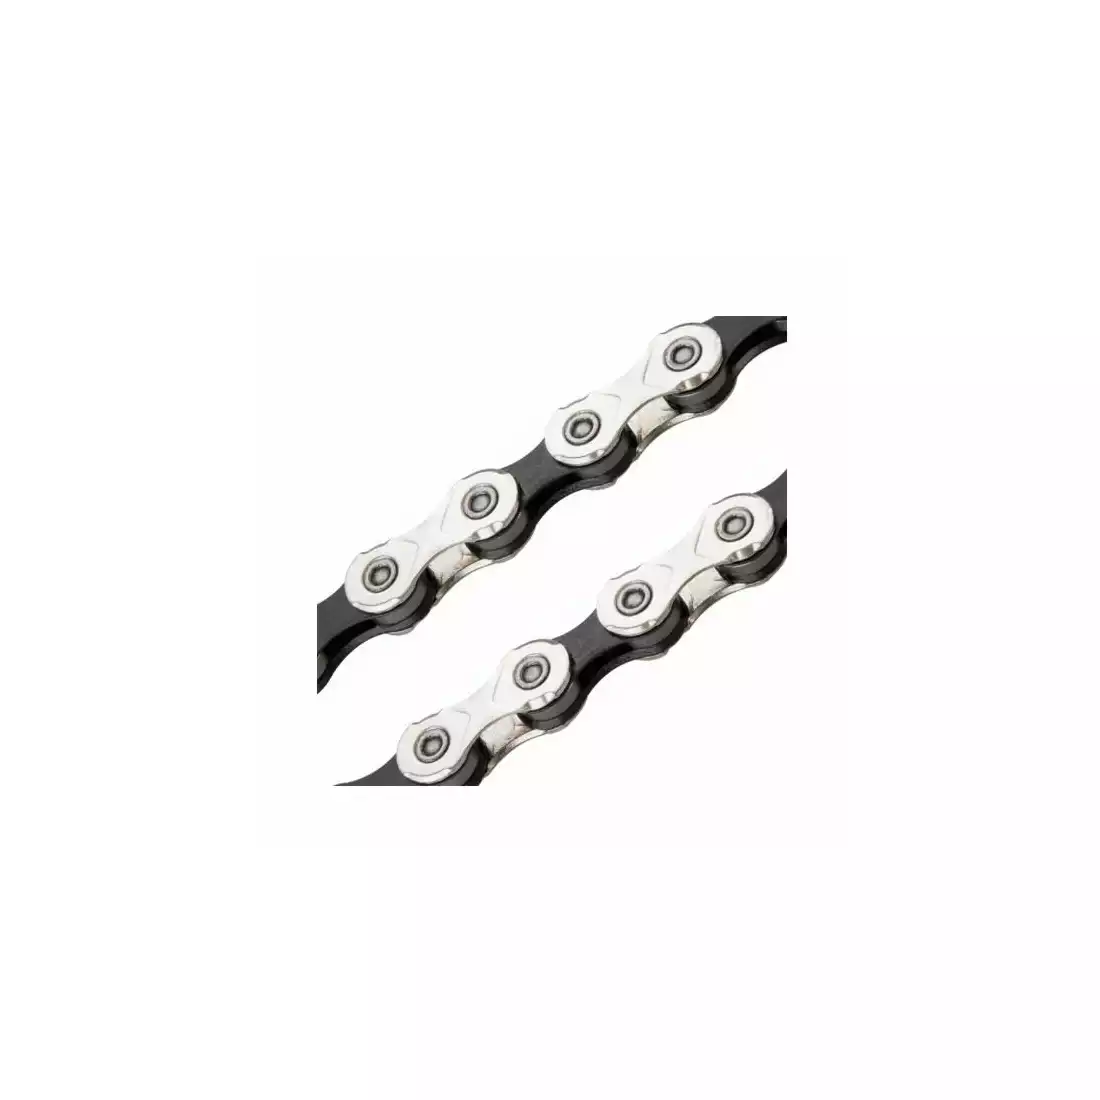 KMC X10 Bicycle chain 10-speed, 114 links, black-silver